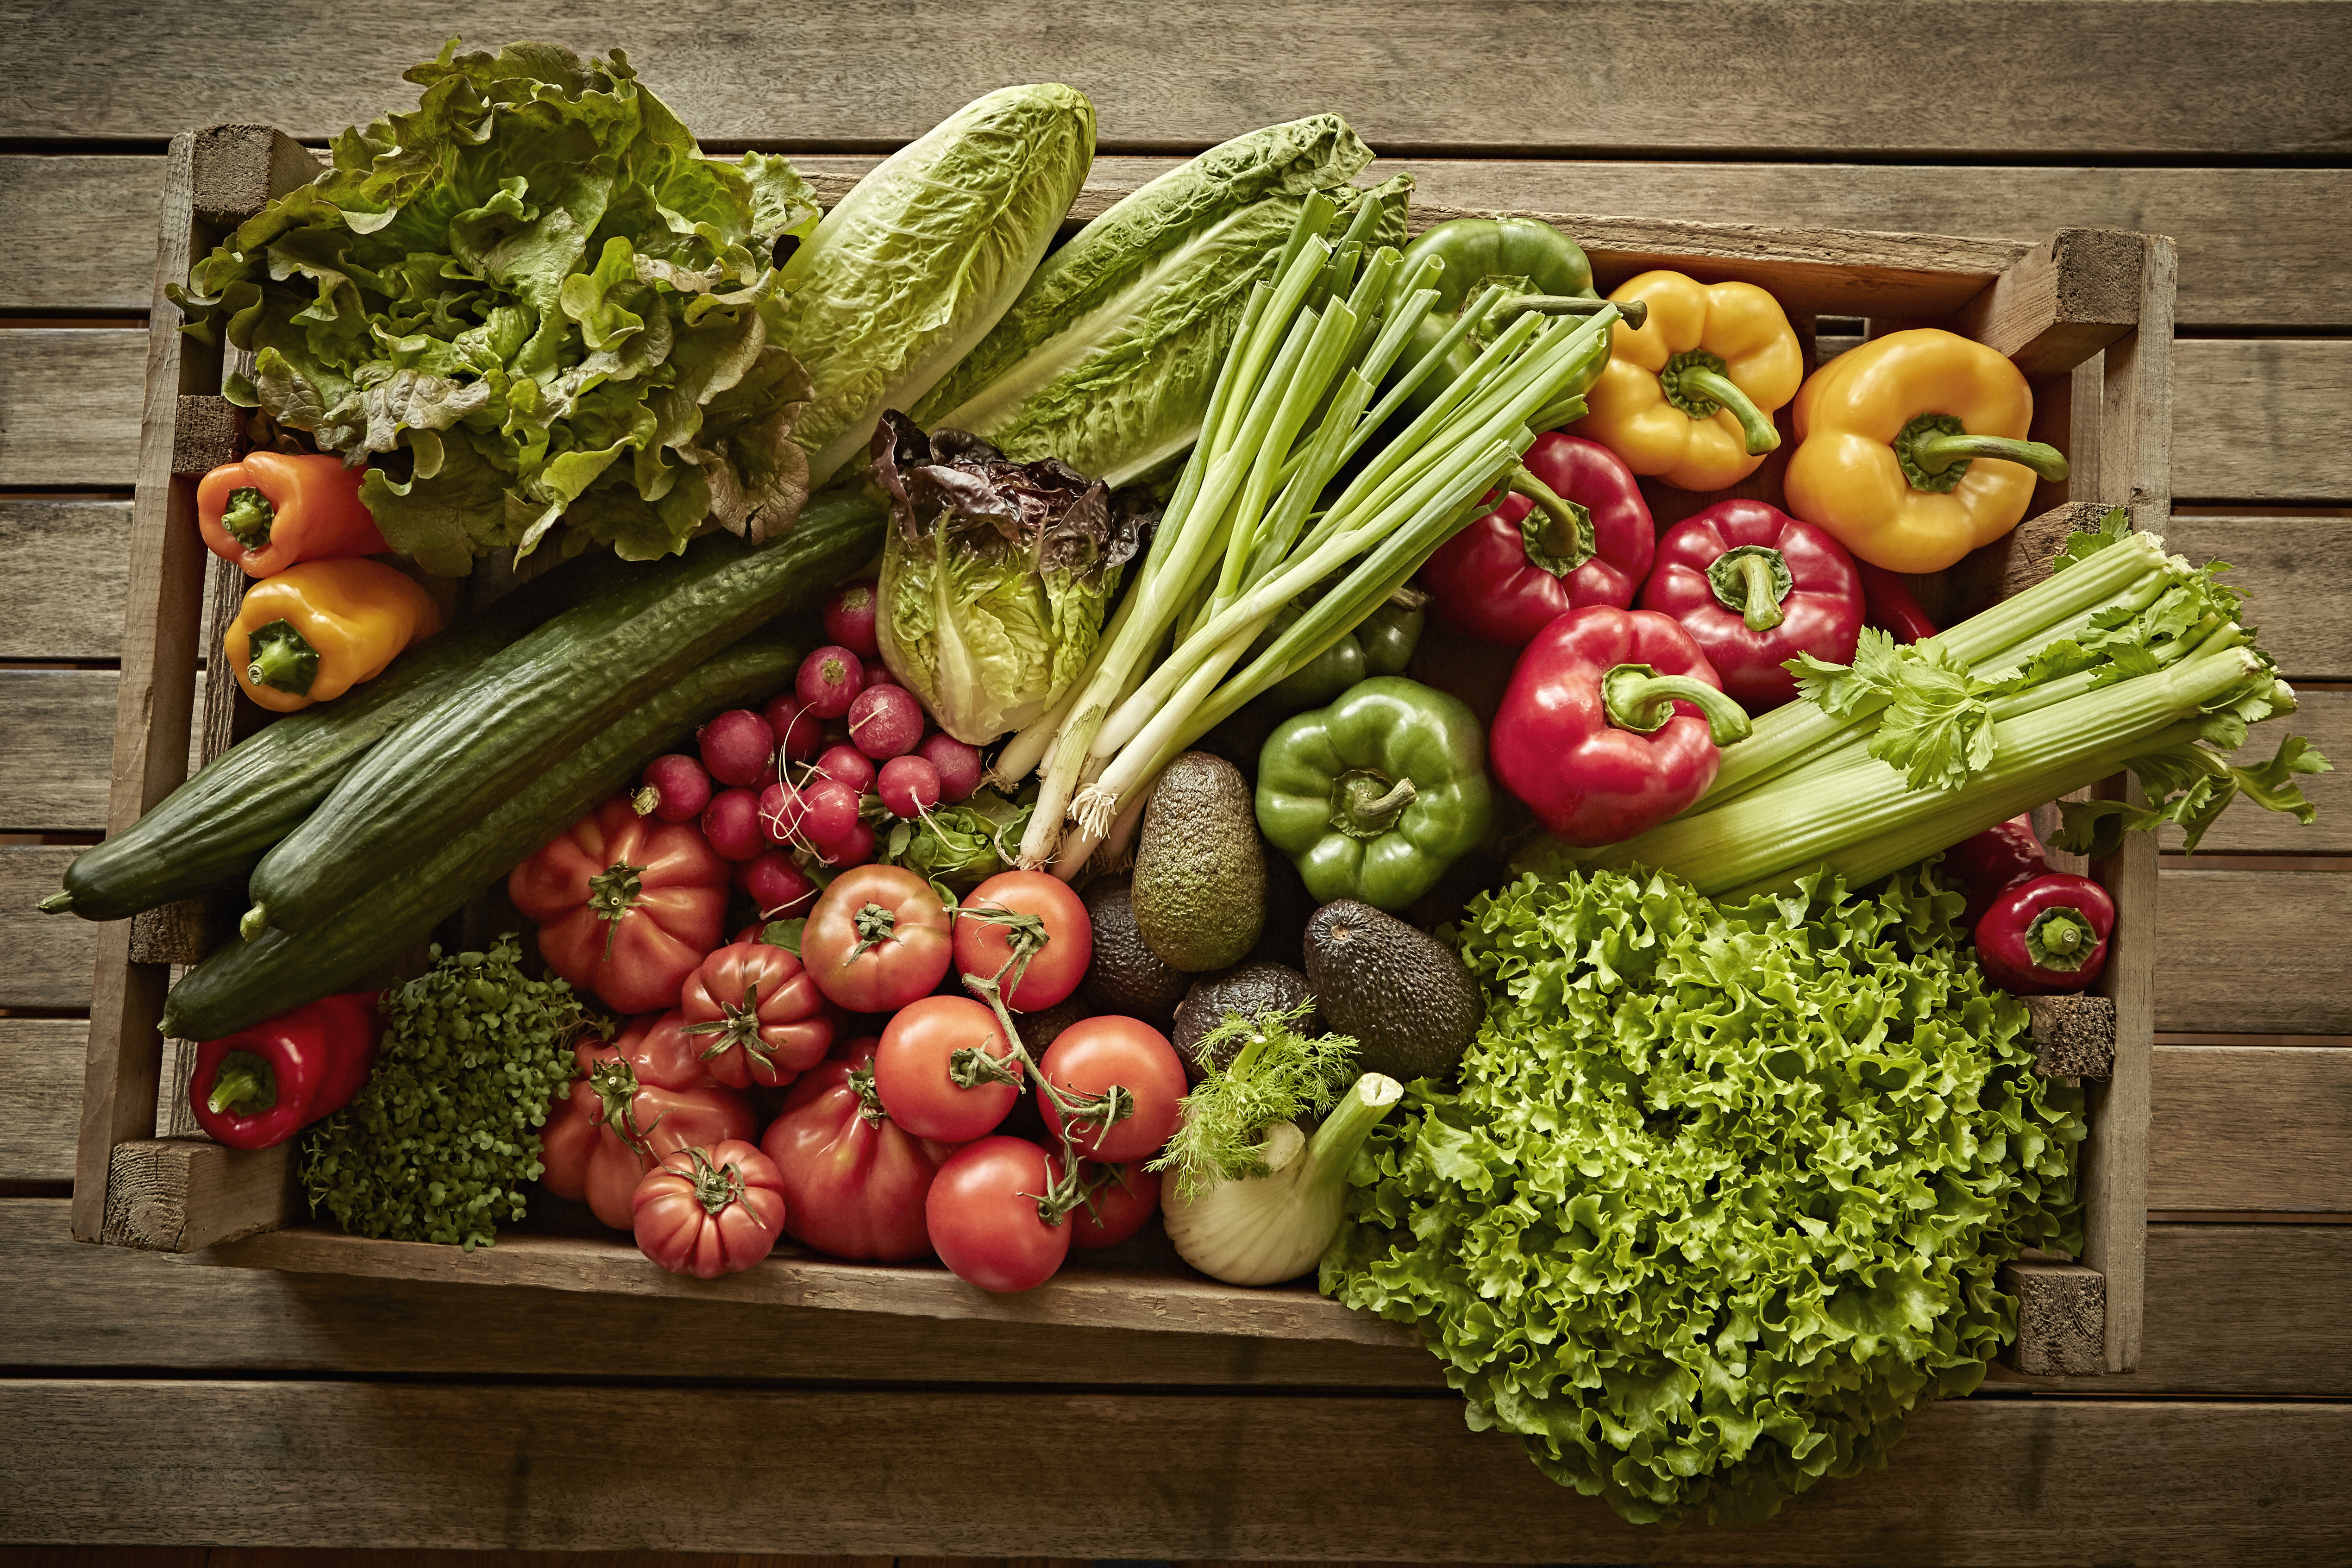 Still alive, fresh, organic, healthy vegetable harvest in wooden crates